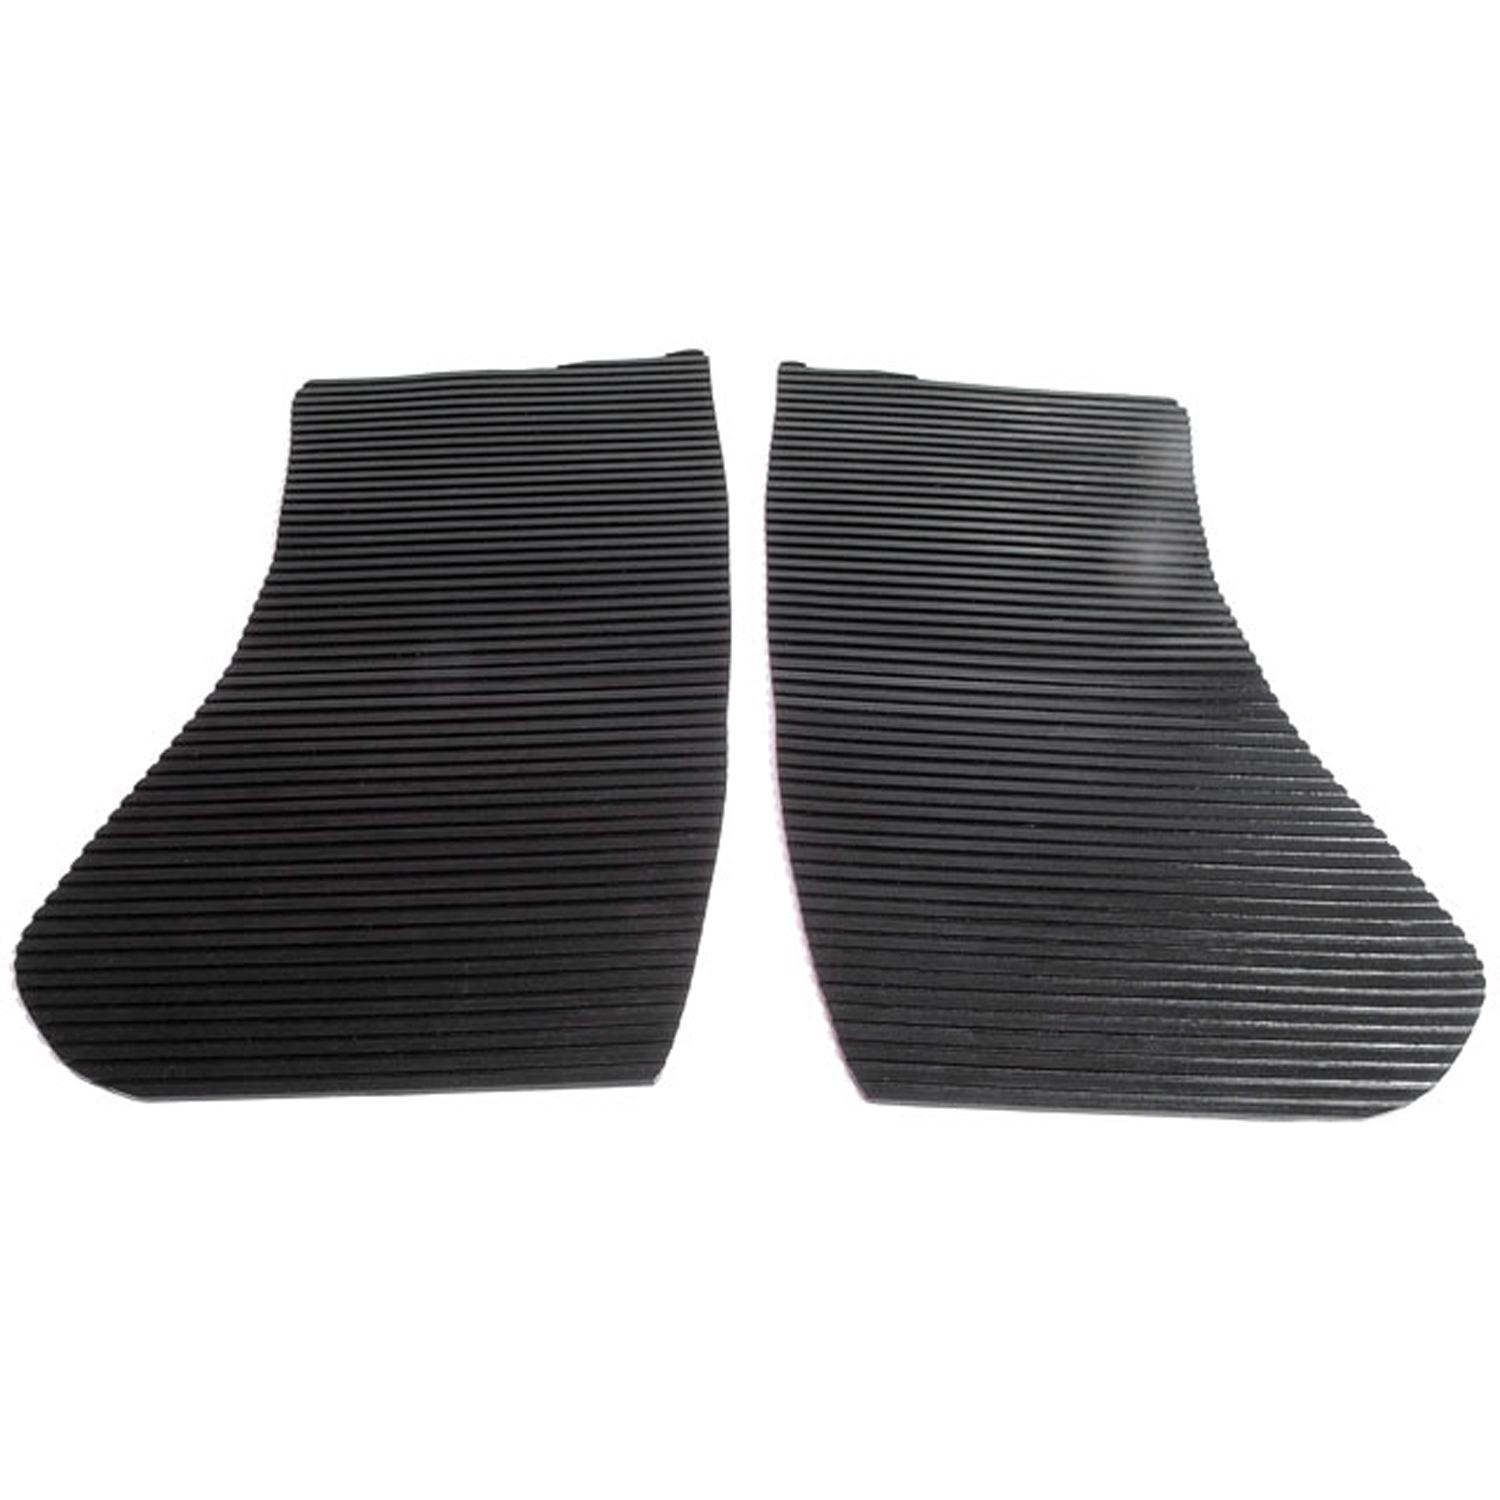 1941 Buick Limited Series 90 Gravel Shields.  Molded flat without metal backing plates-FS 35